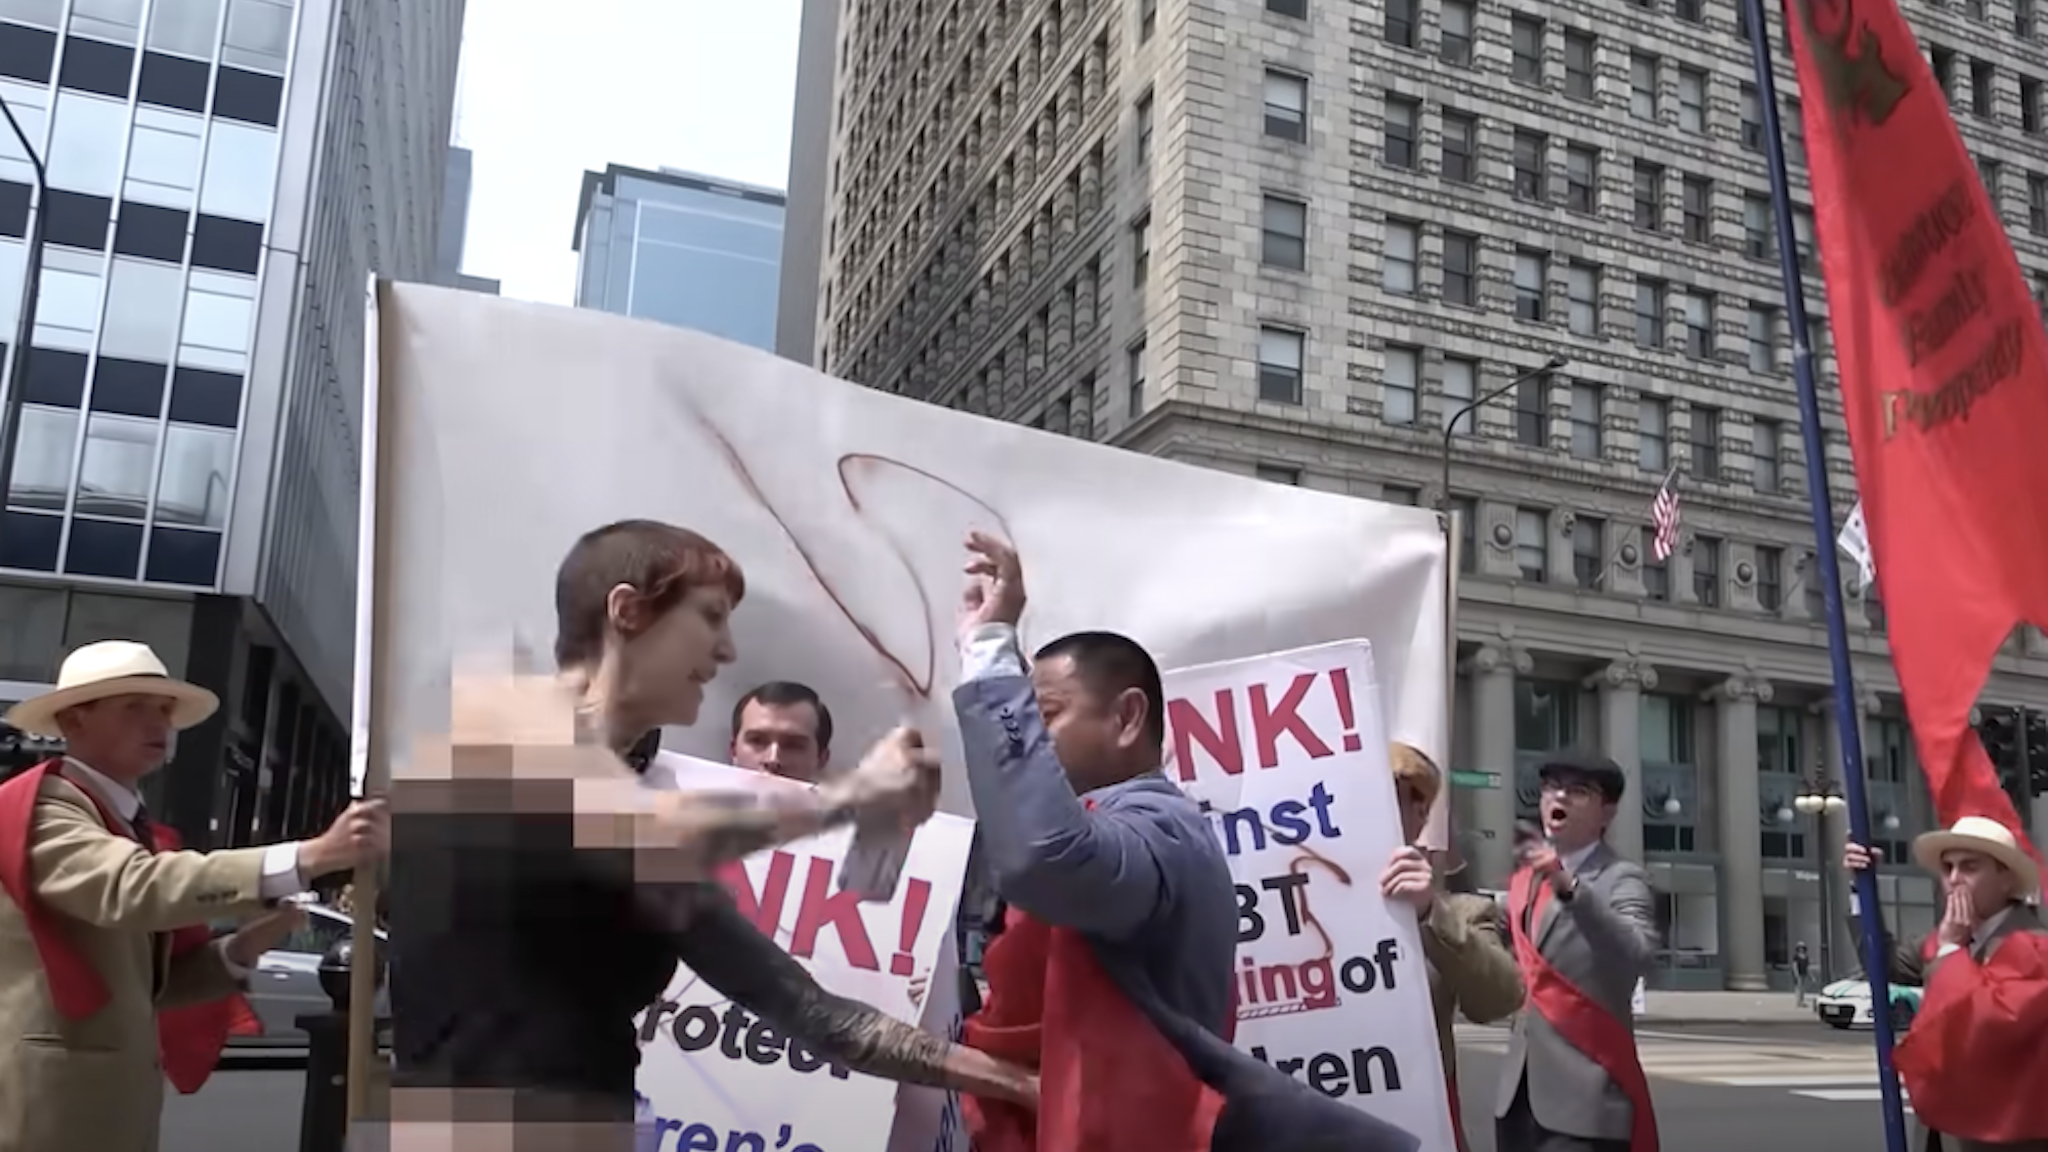 Screenshot/YouTube: TFP Student Action — LGBT Advocates Attack Peaceful Pro-Family Event: "Paint hit me in the eyes"